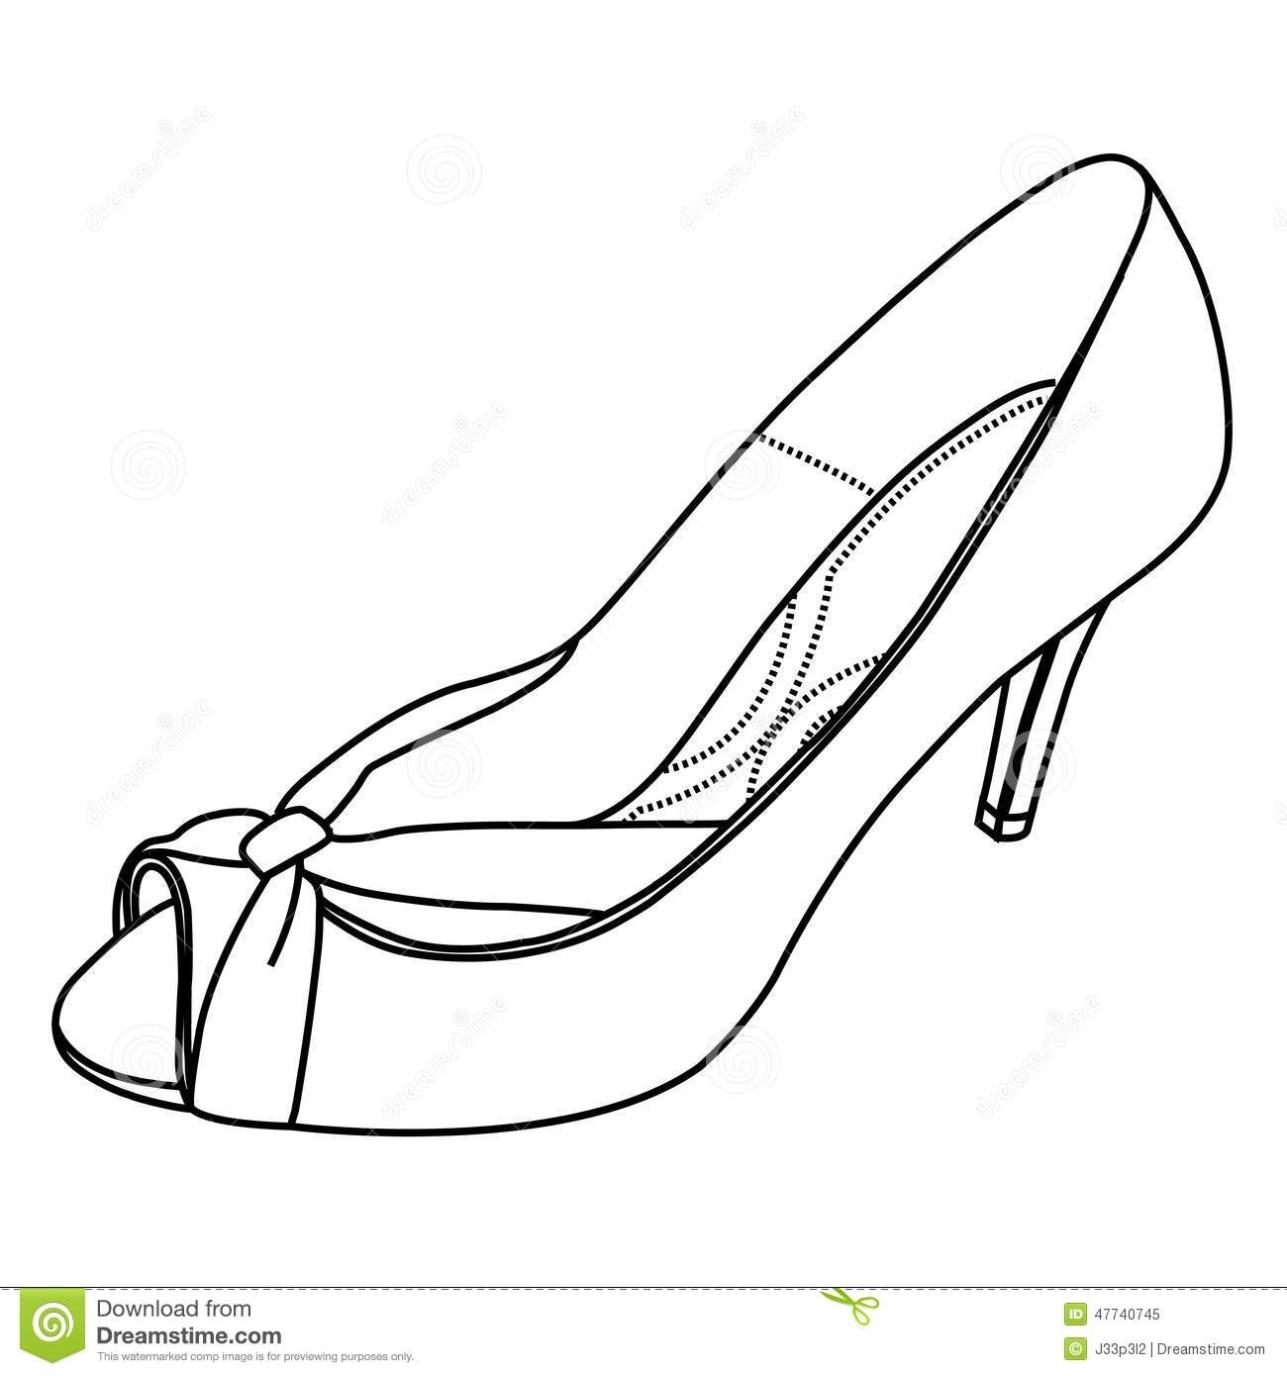 High Heel Drawing Template At Getdrawings | Free Download in High Heel Shoe Template For Card